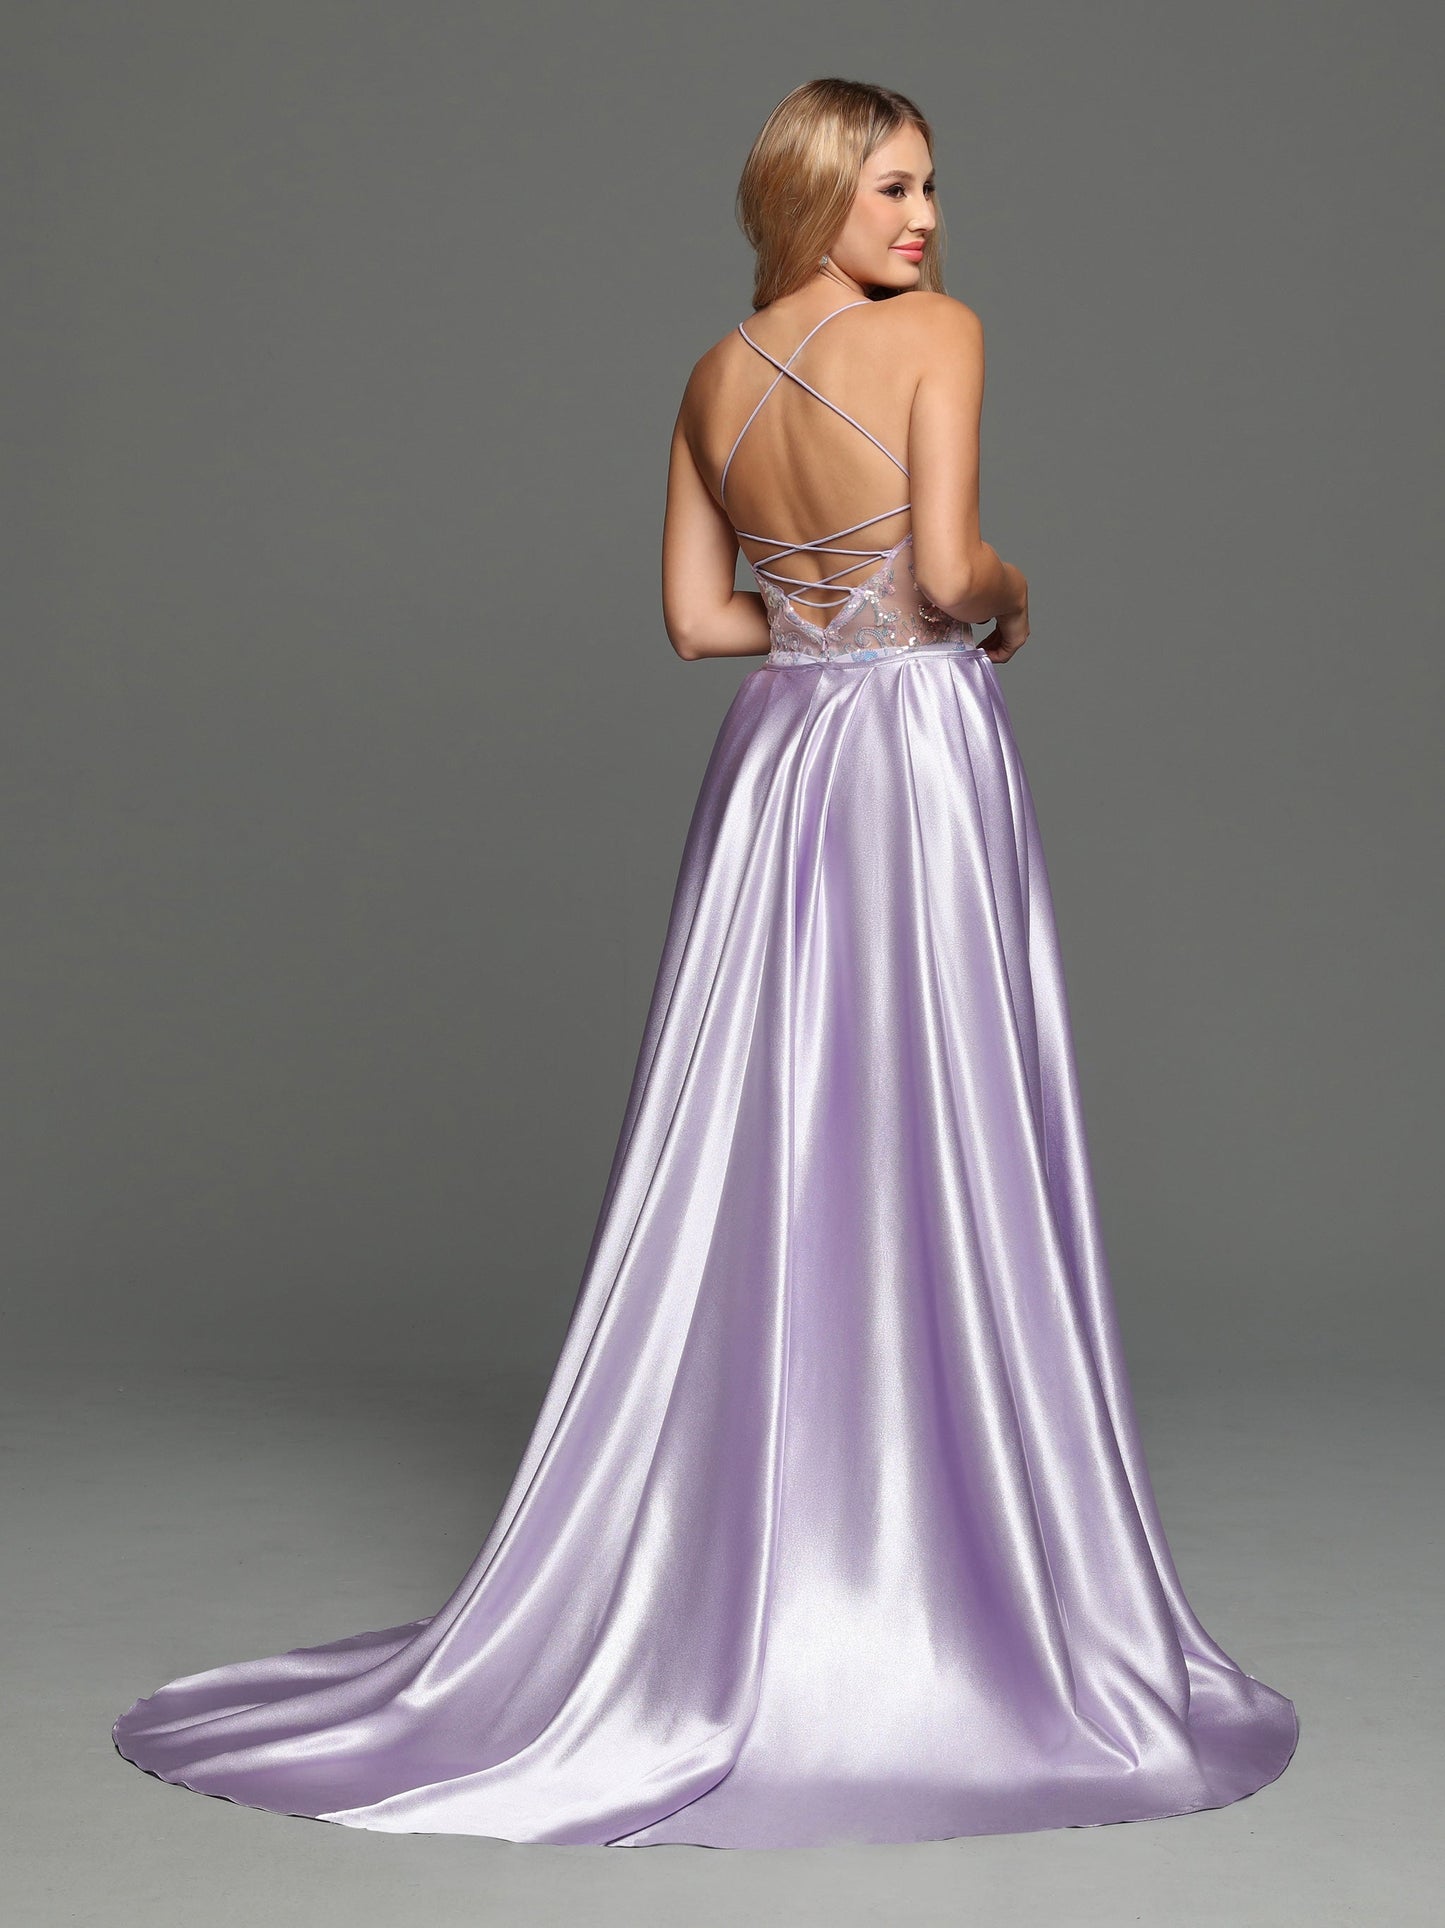 <p>Sparkle Prom 72233 Long Fitted Sequin Sheer sequin v neck corset with satin detachable&nbsp; Overskirt Prom Dress Pageant Gown Backless Corset Gown. formal dress</p> <p>Sizes: 4</p> <p>Colors: Lilac</p>